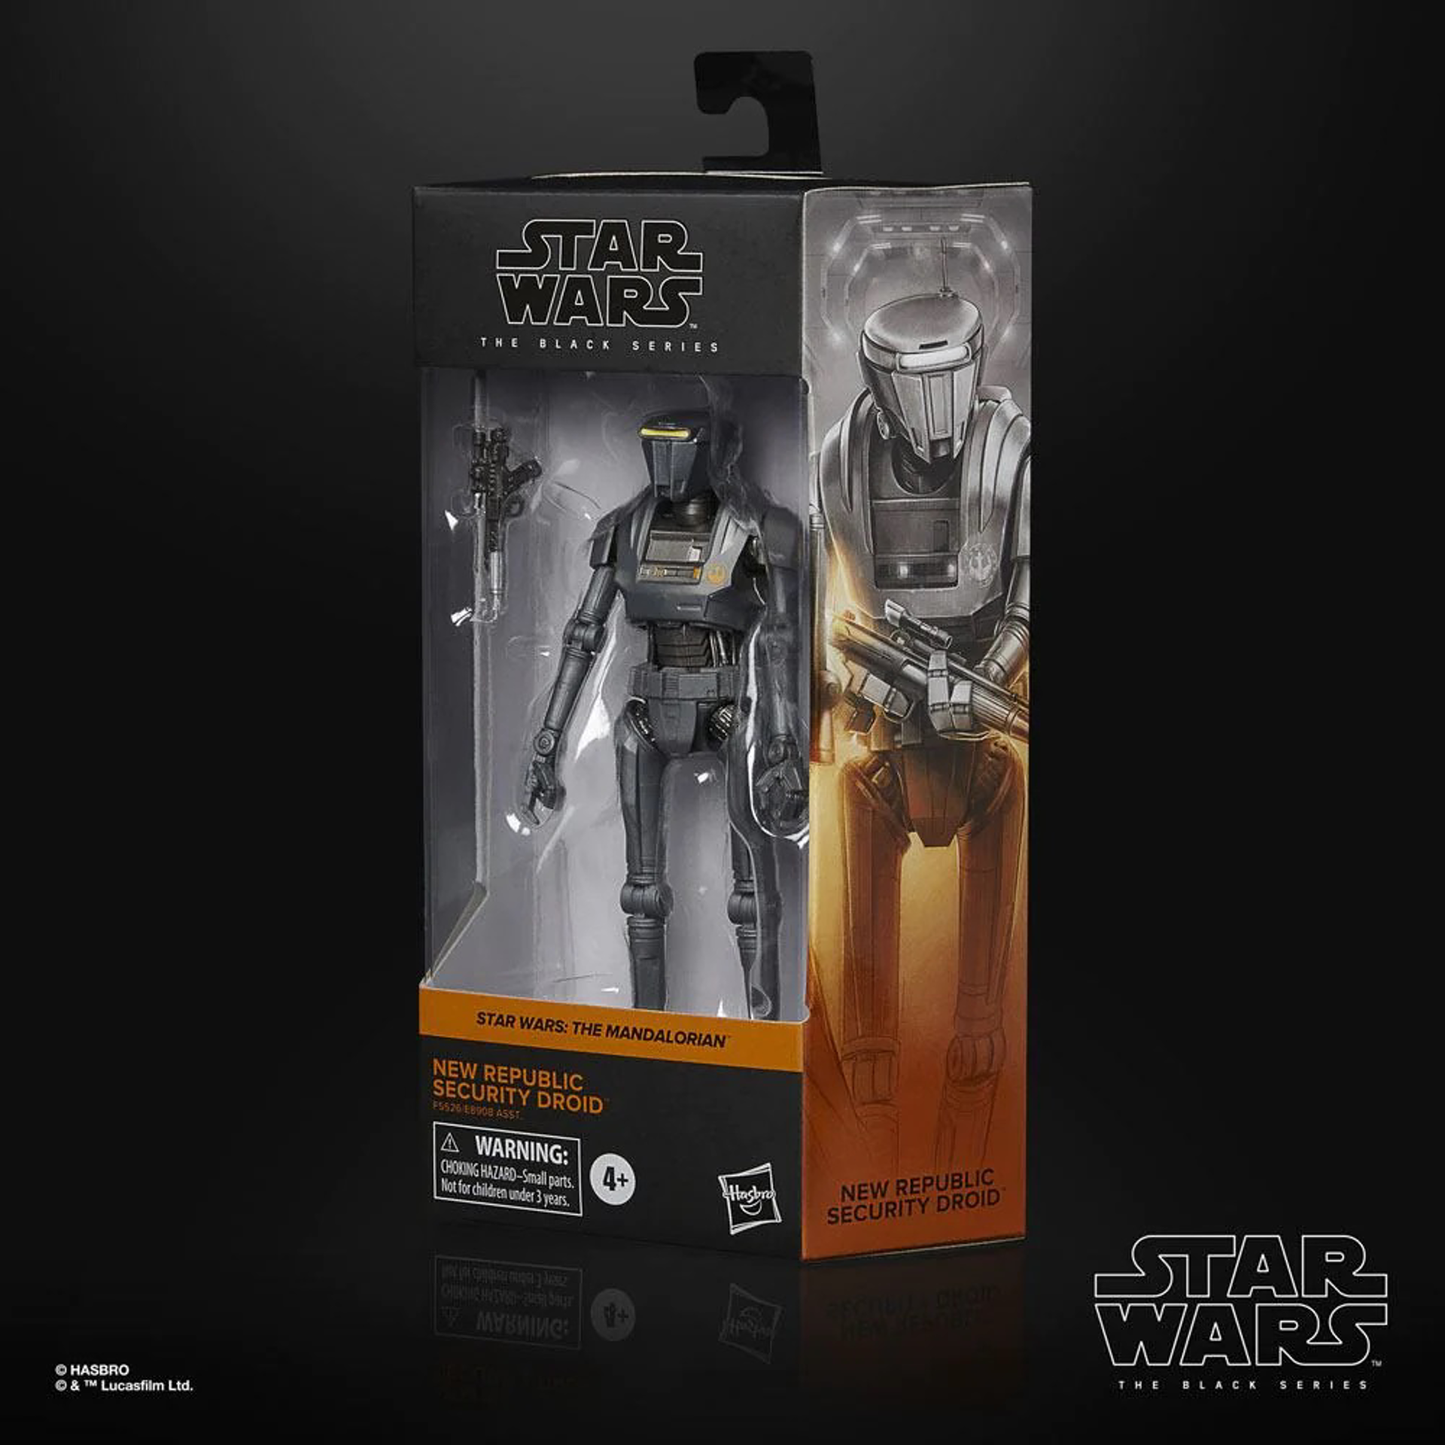 Star Wars The Black Series - New Republic Security Droid-actiefiguur 15 cm